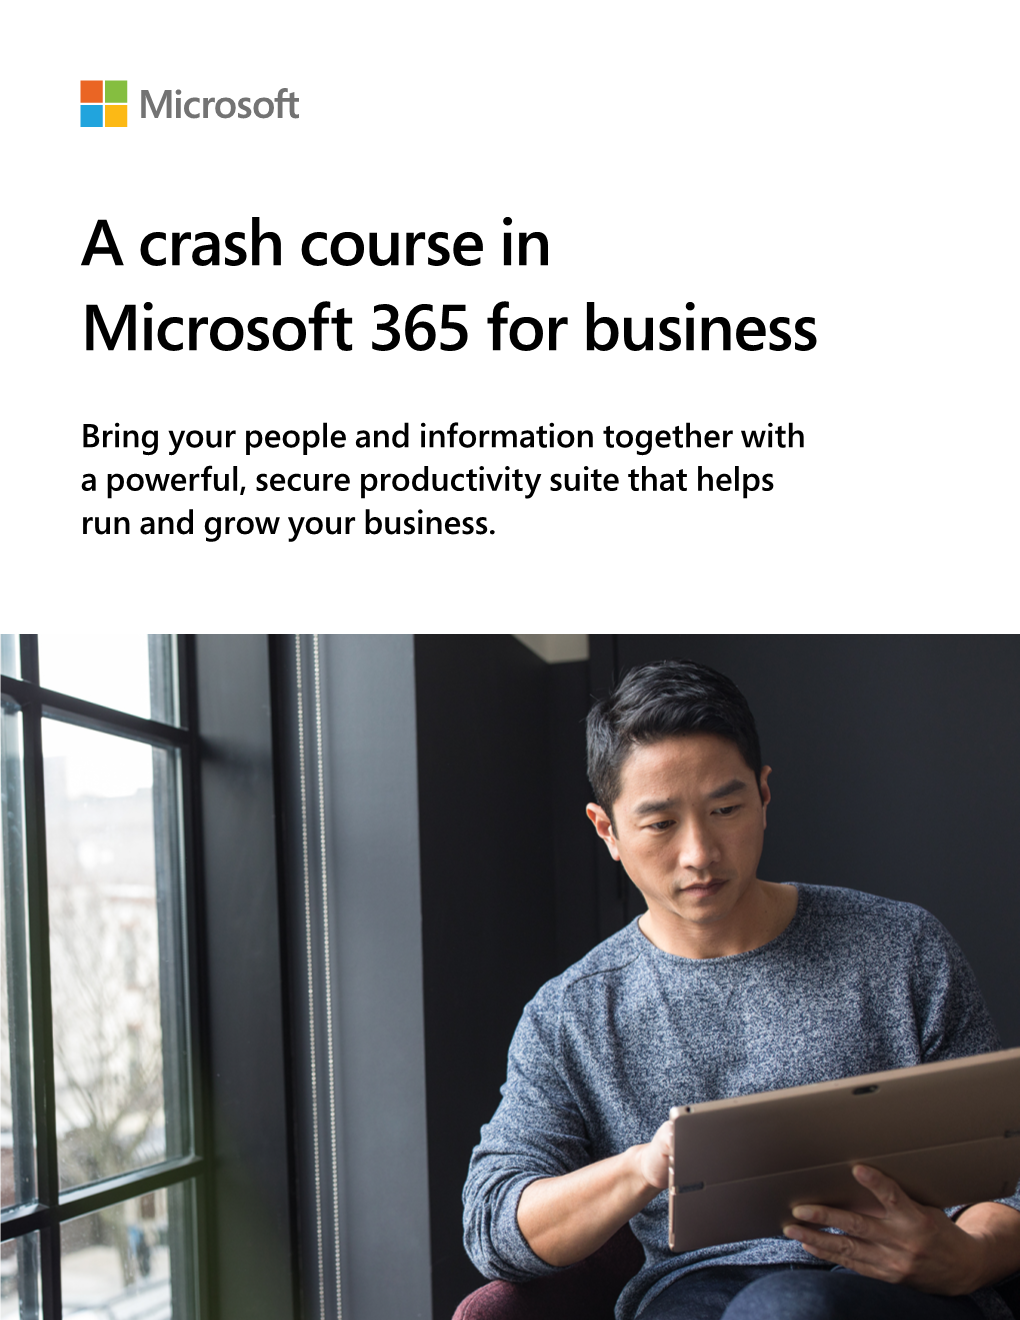 A Crash Course in Microsoft 365 for Business